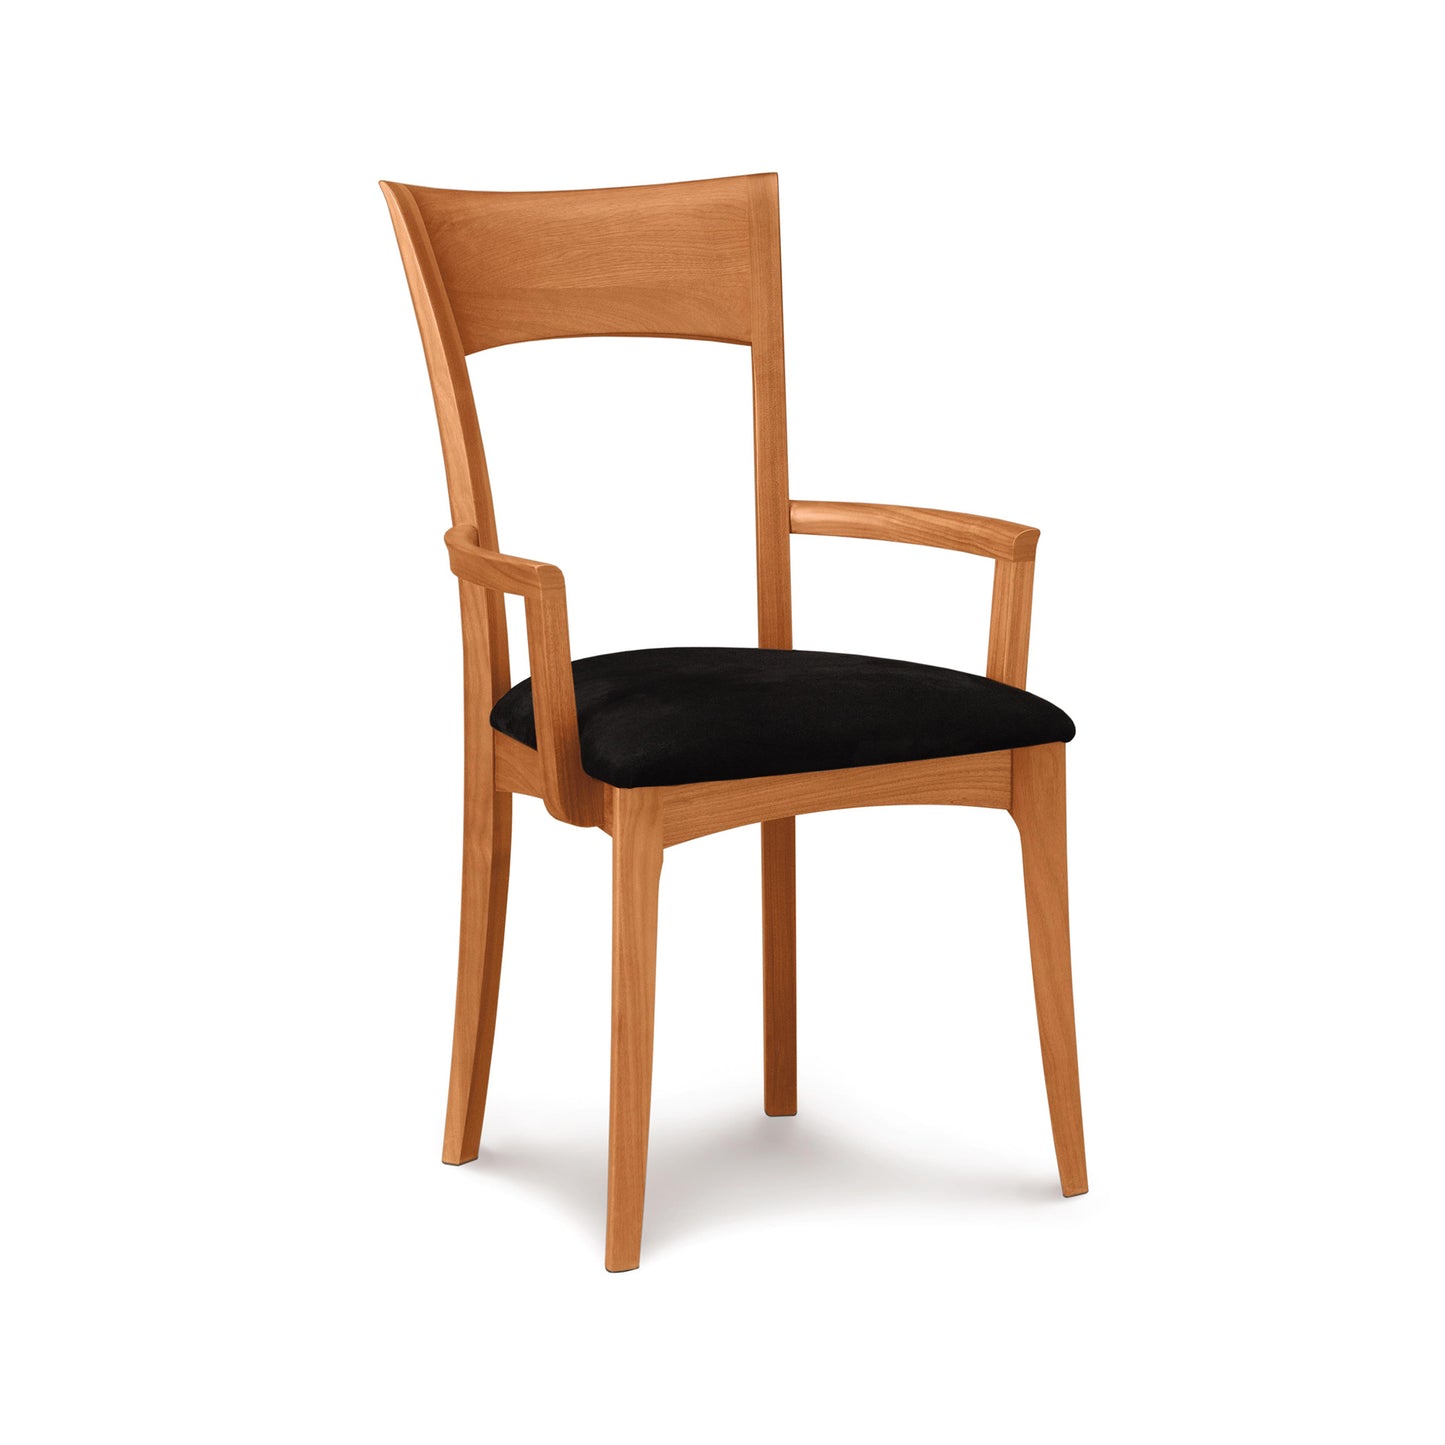 A wooden Ingrid Chair from Copeland Furniture with armrests and a black cushioned seat, isolated on a white background.